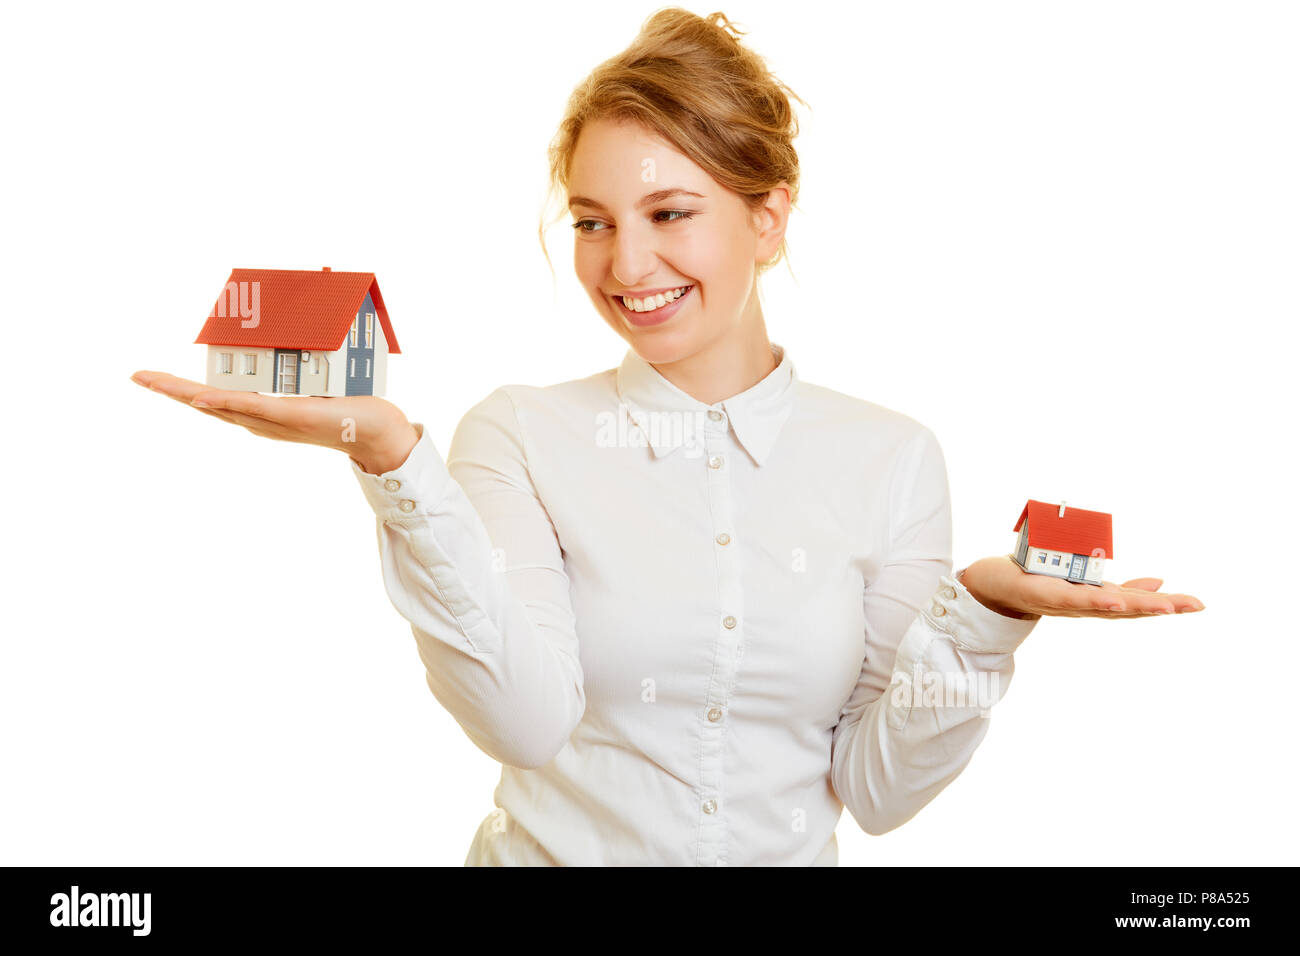 Young woman at real estate and houses compare on her palm Stock Photo